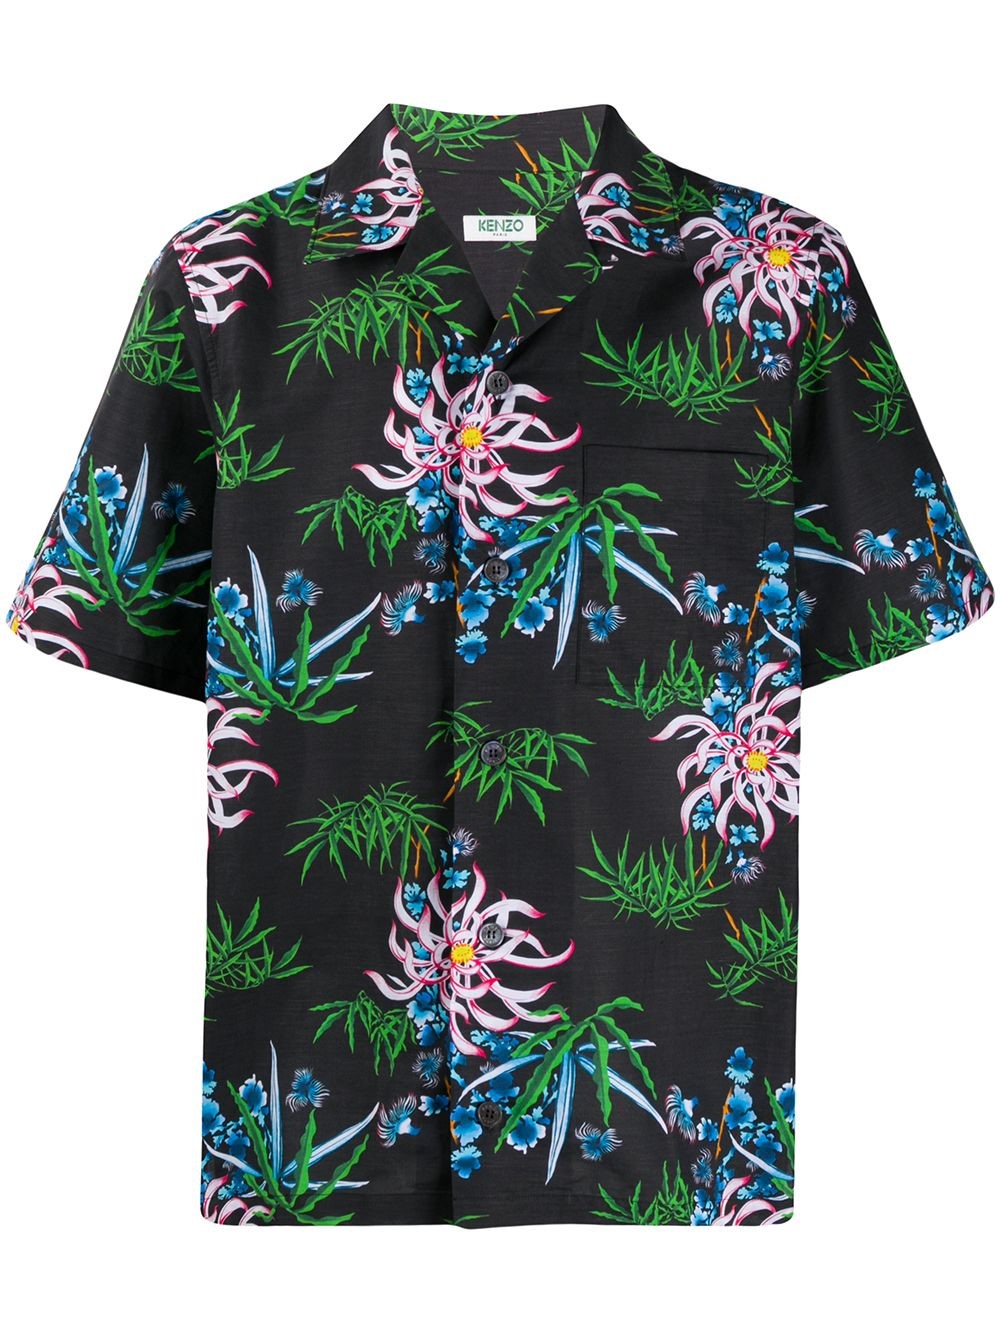 kenzo FLORAL PRINT SHIRT available on 